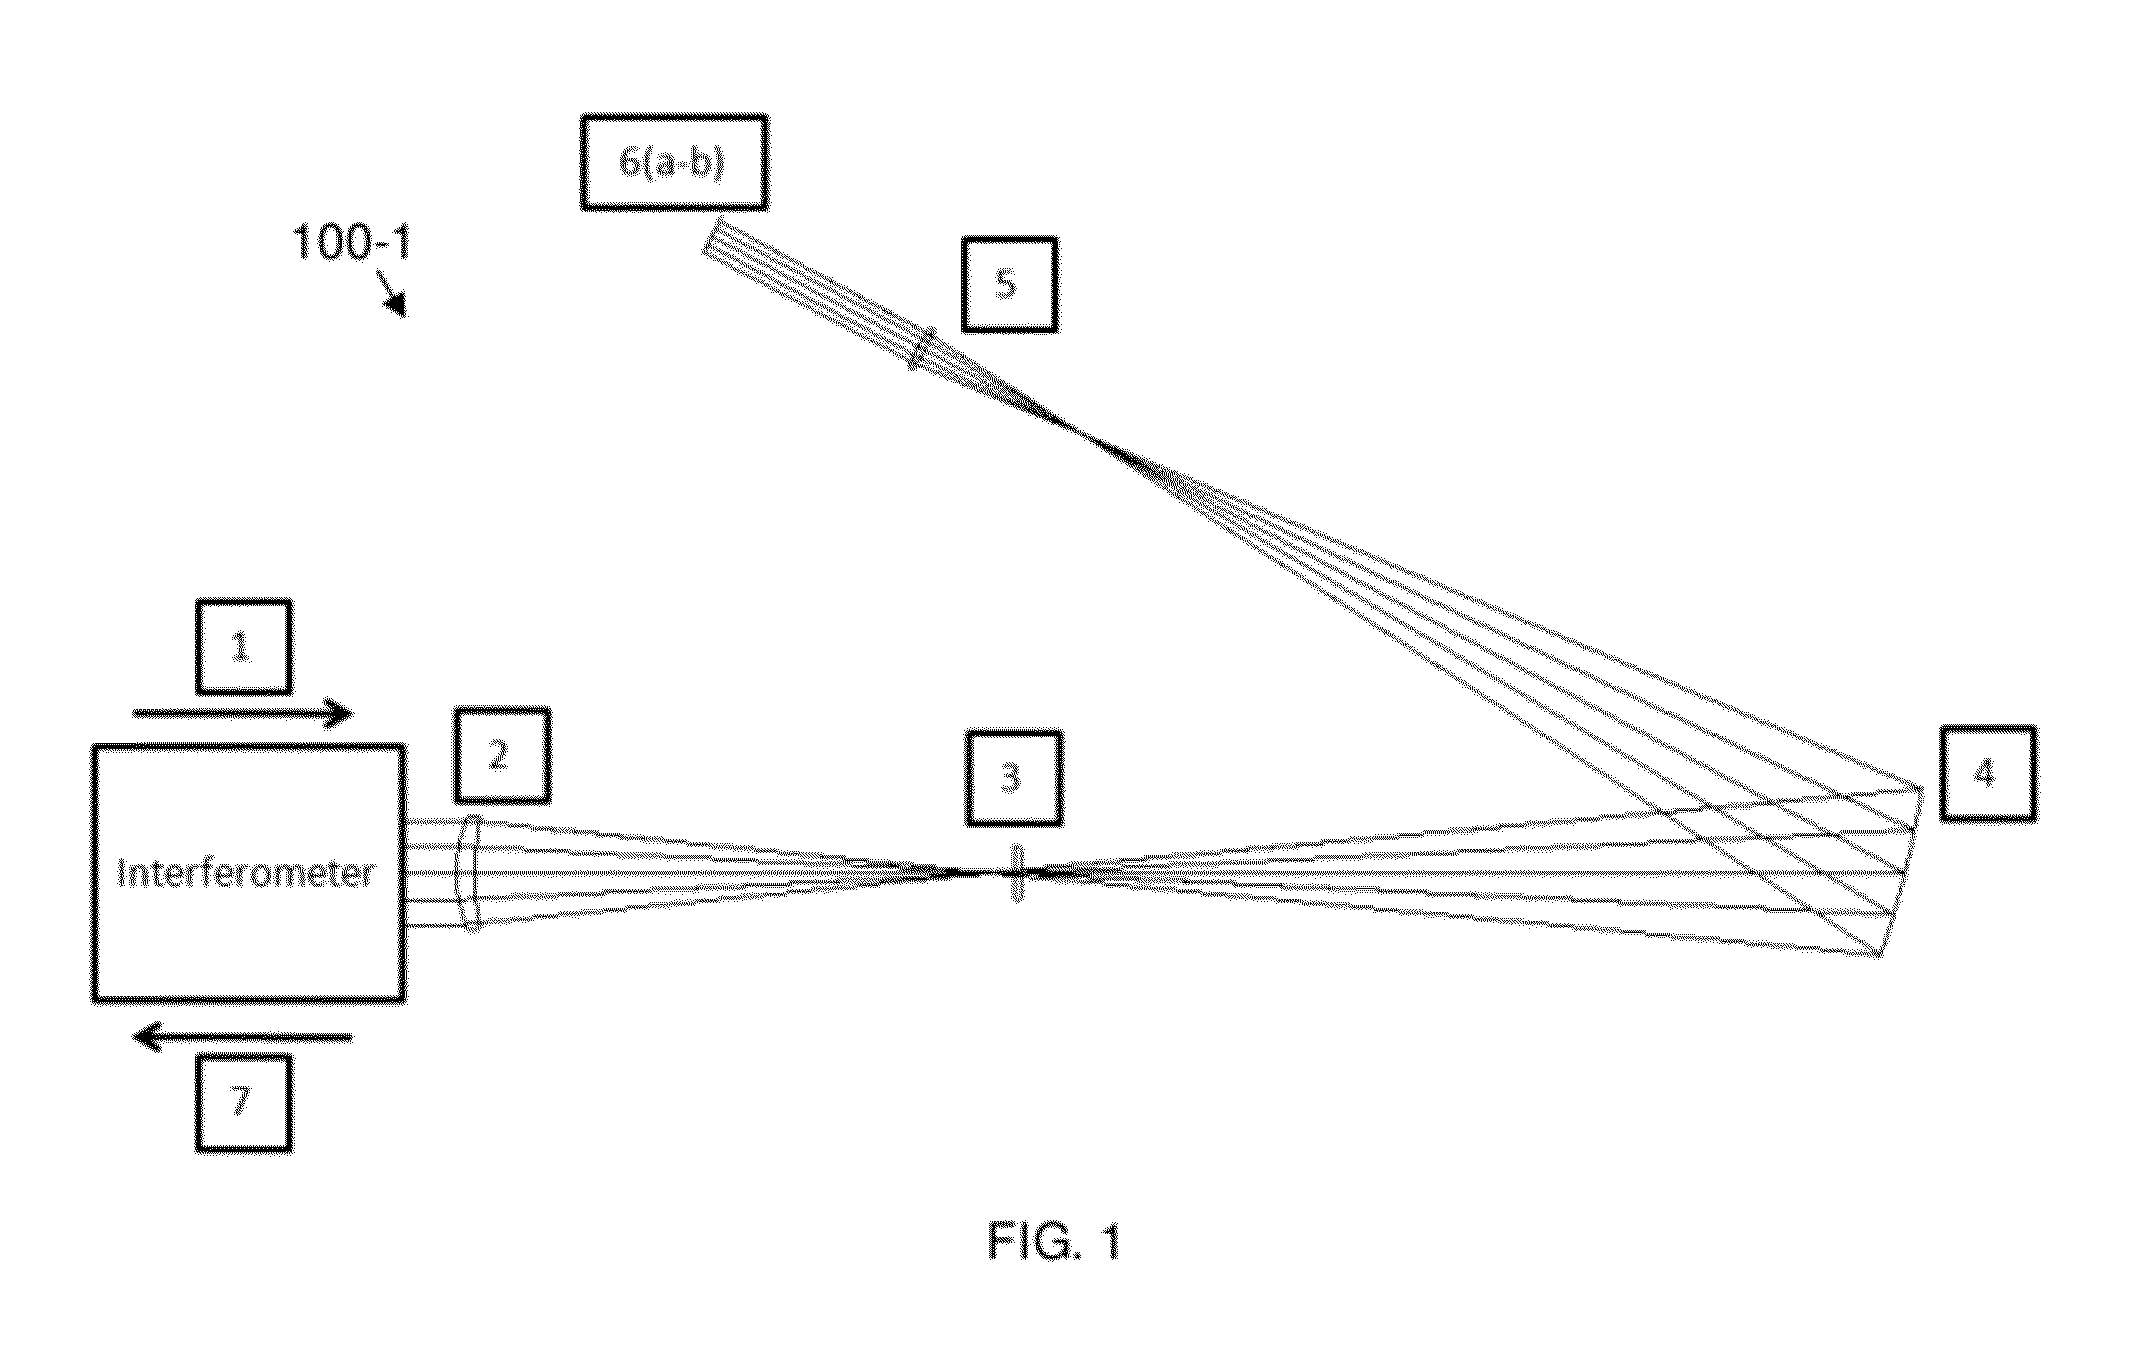 Optical testing apparatus and methods